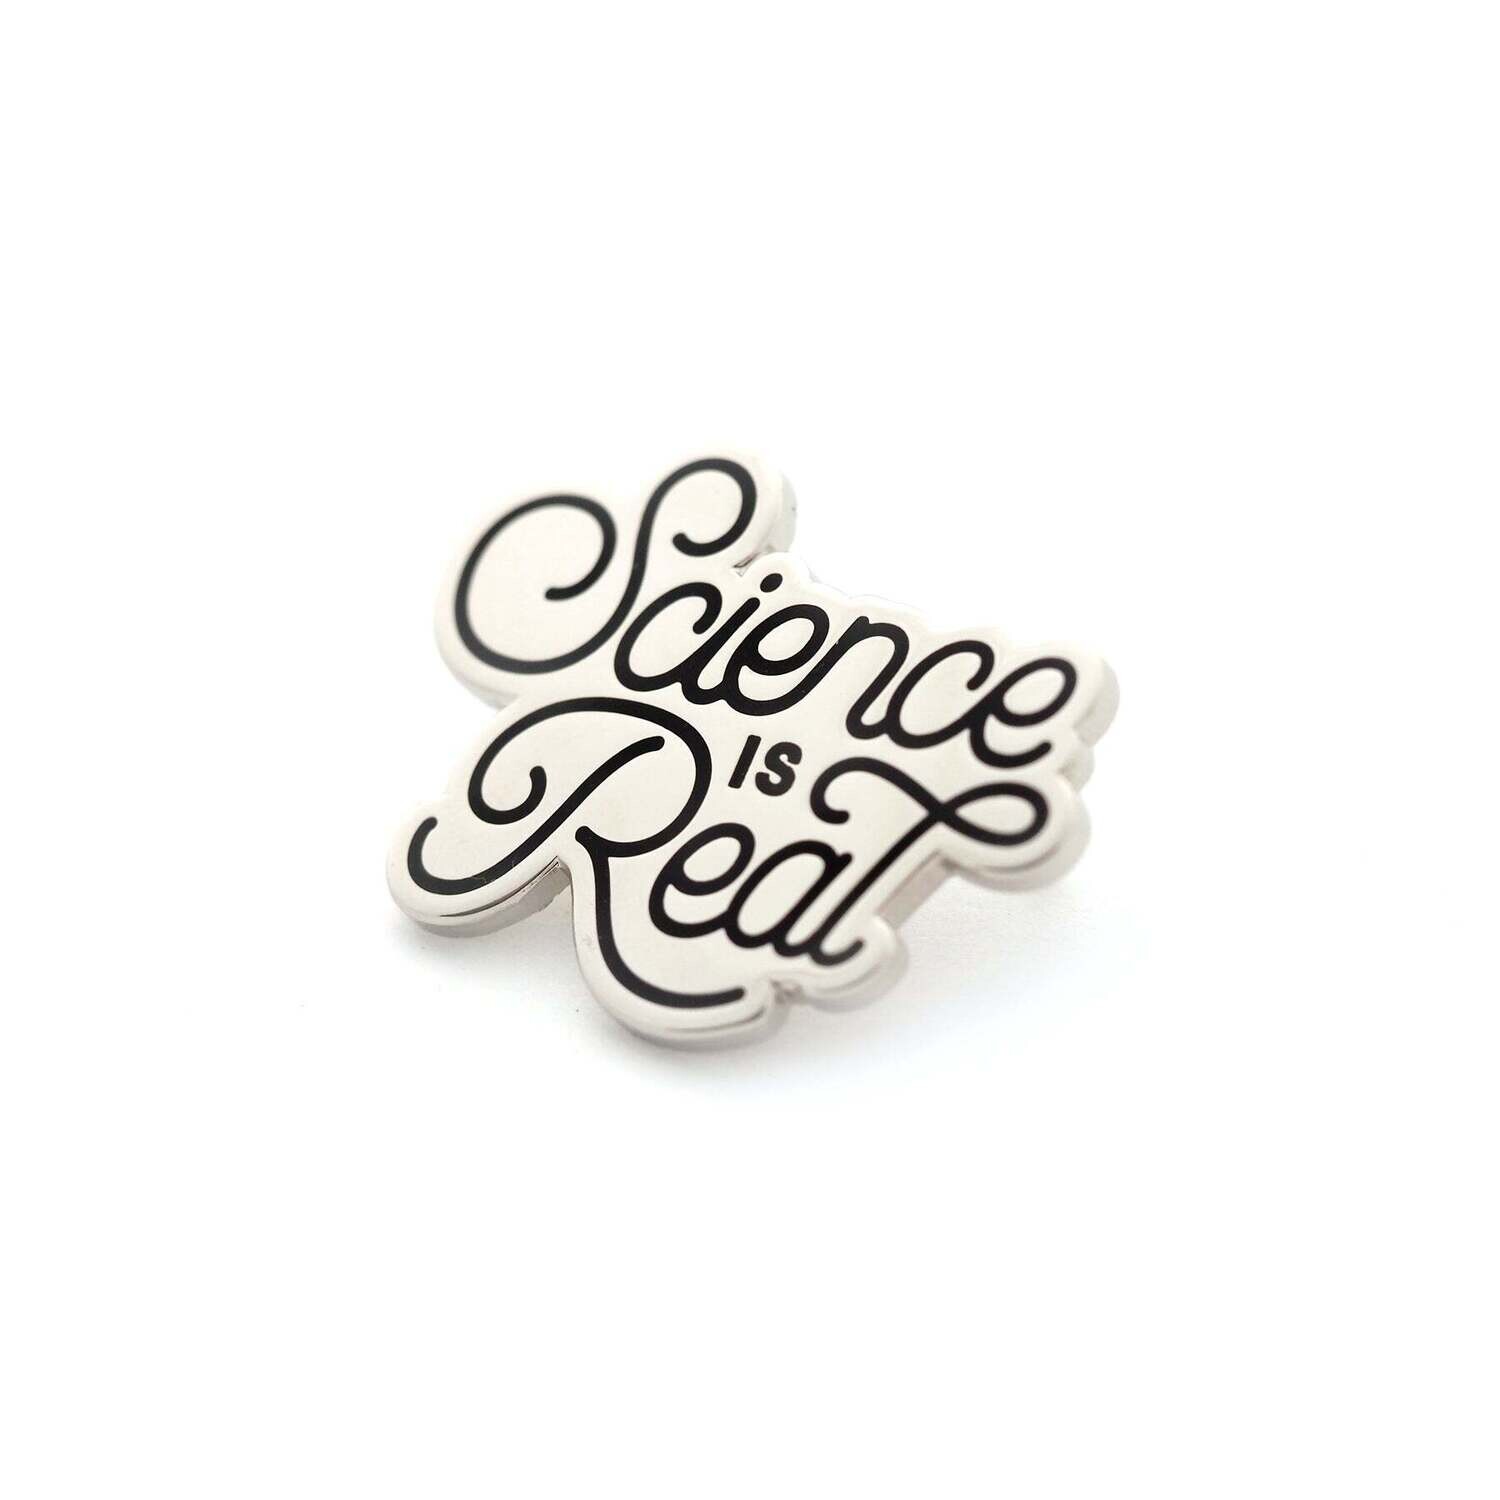 Science is Real - Enamel Pin by Shoal